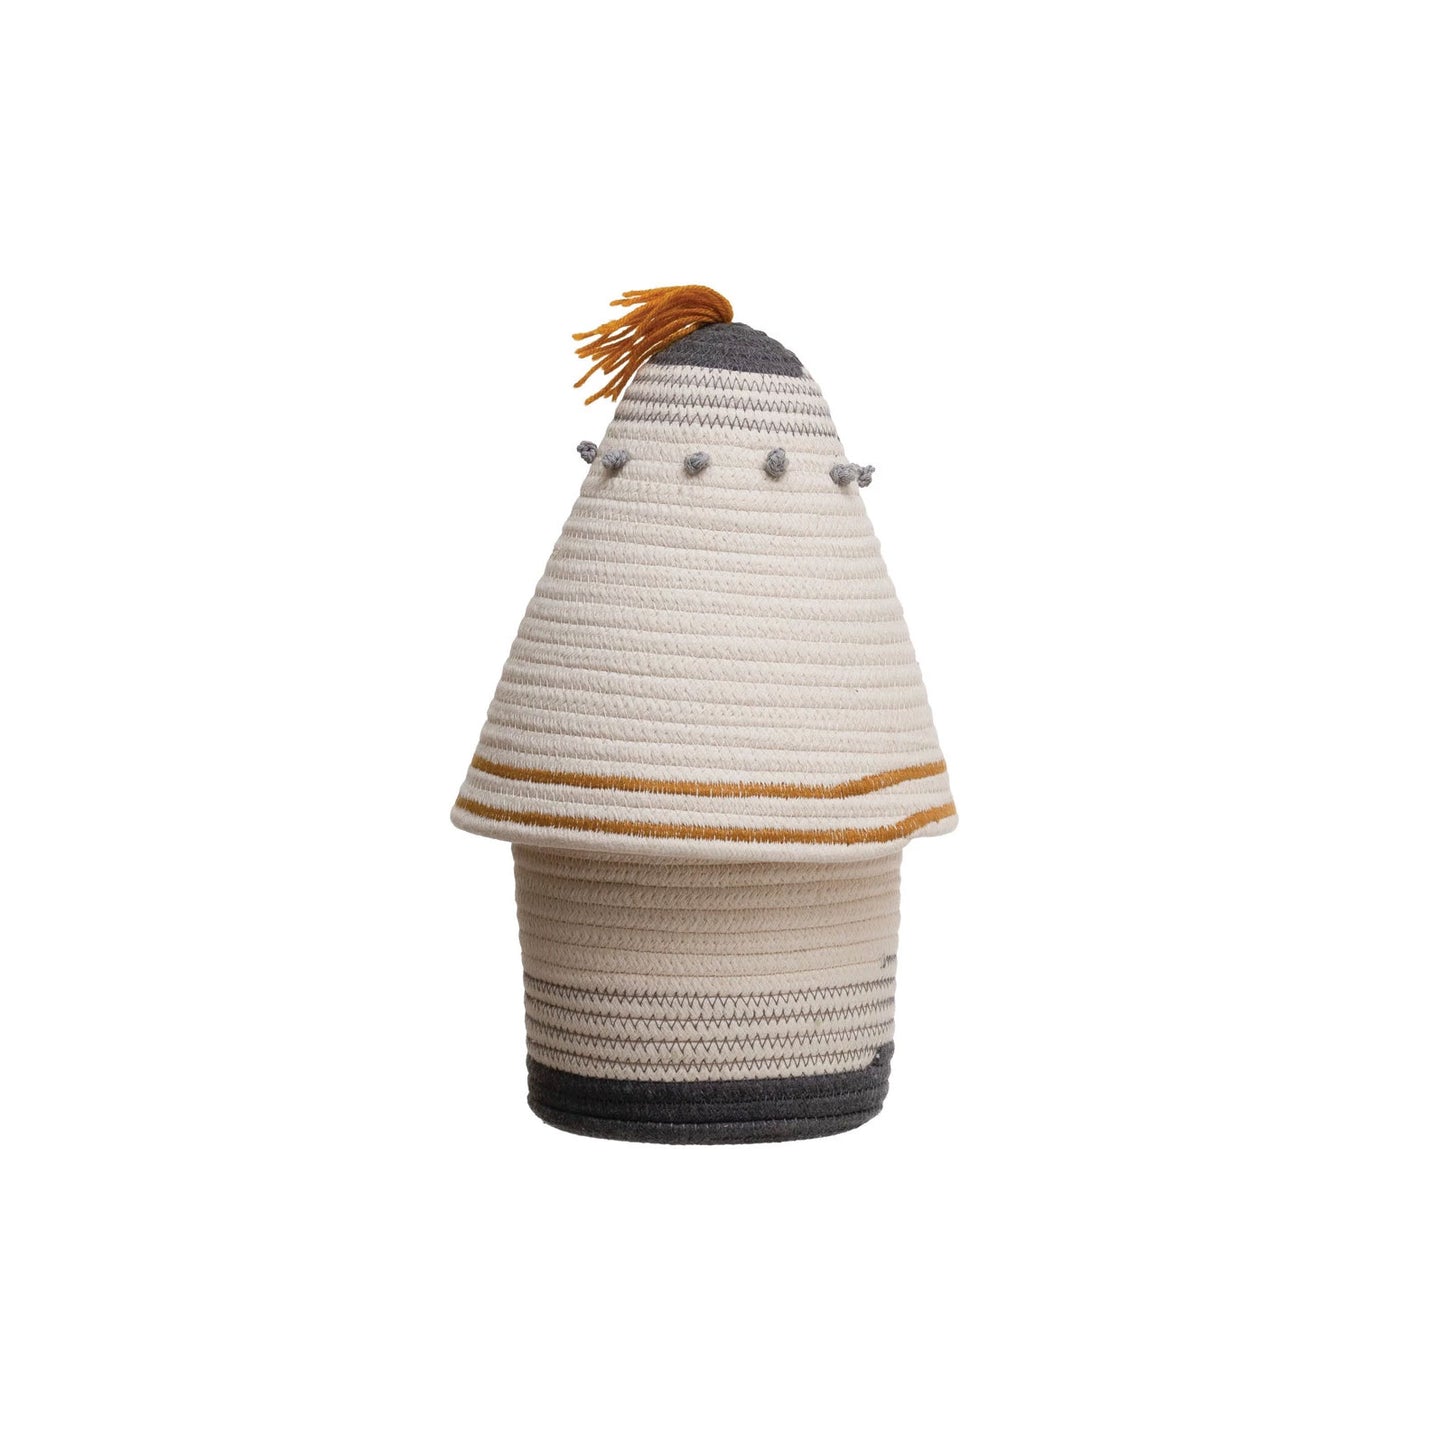 Cotton Rope Basket with Lid